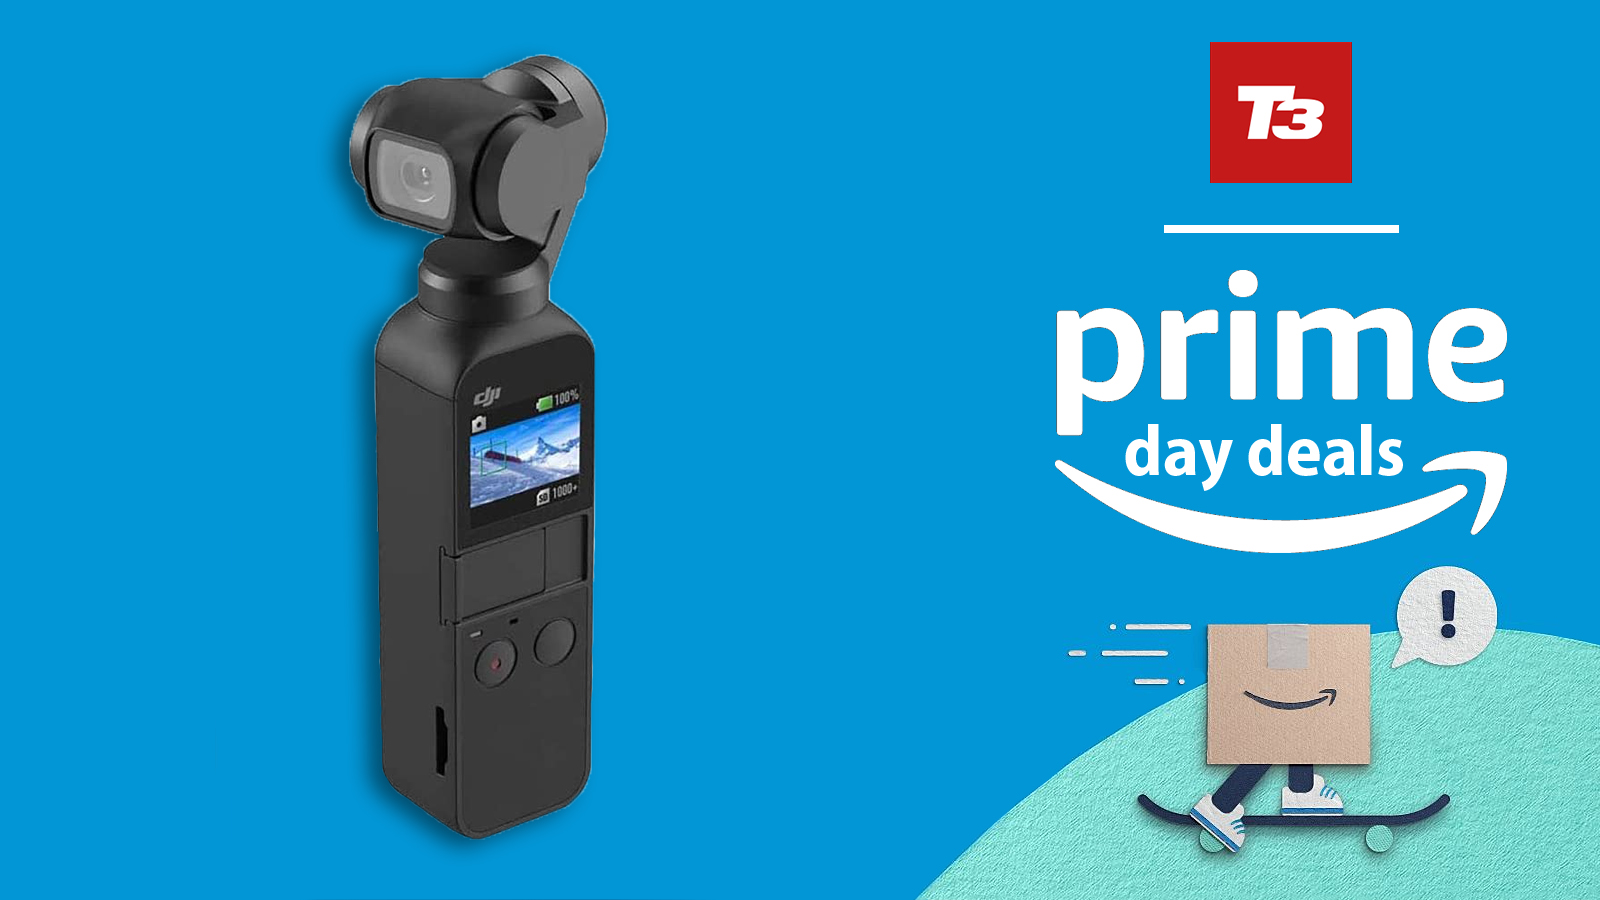 Amazon Prime DJI gimbal deal: SAVE up to £188 with these amazing deals | T3